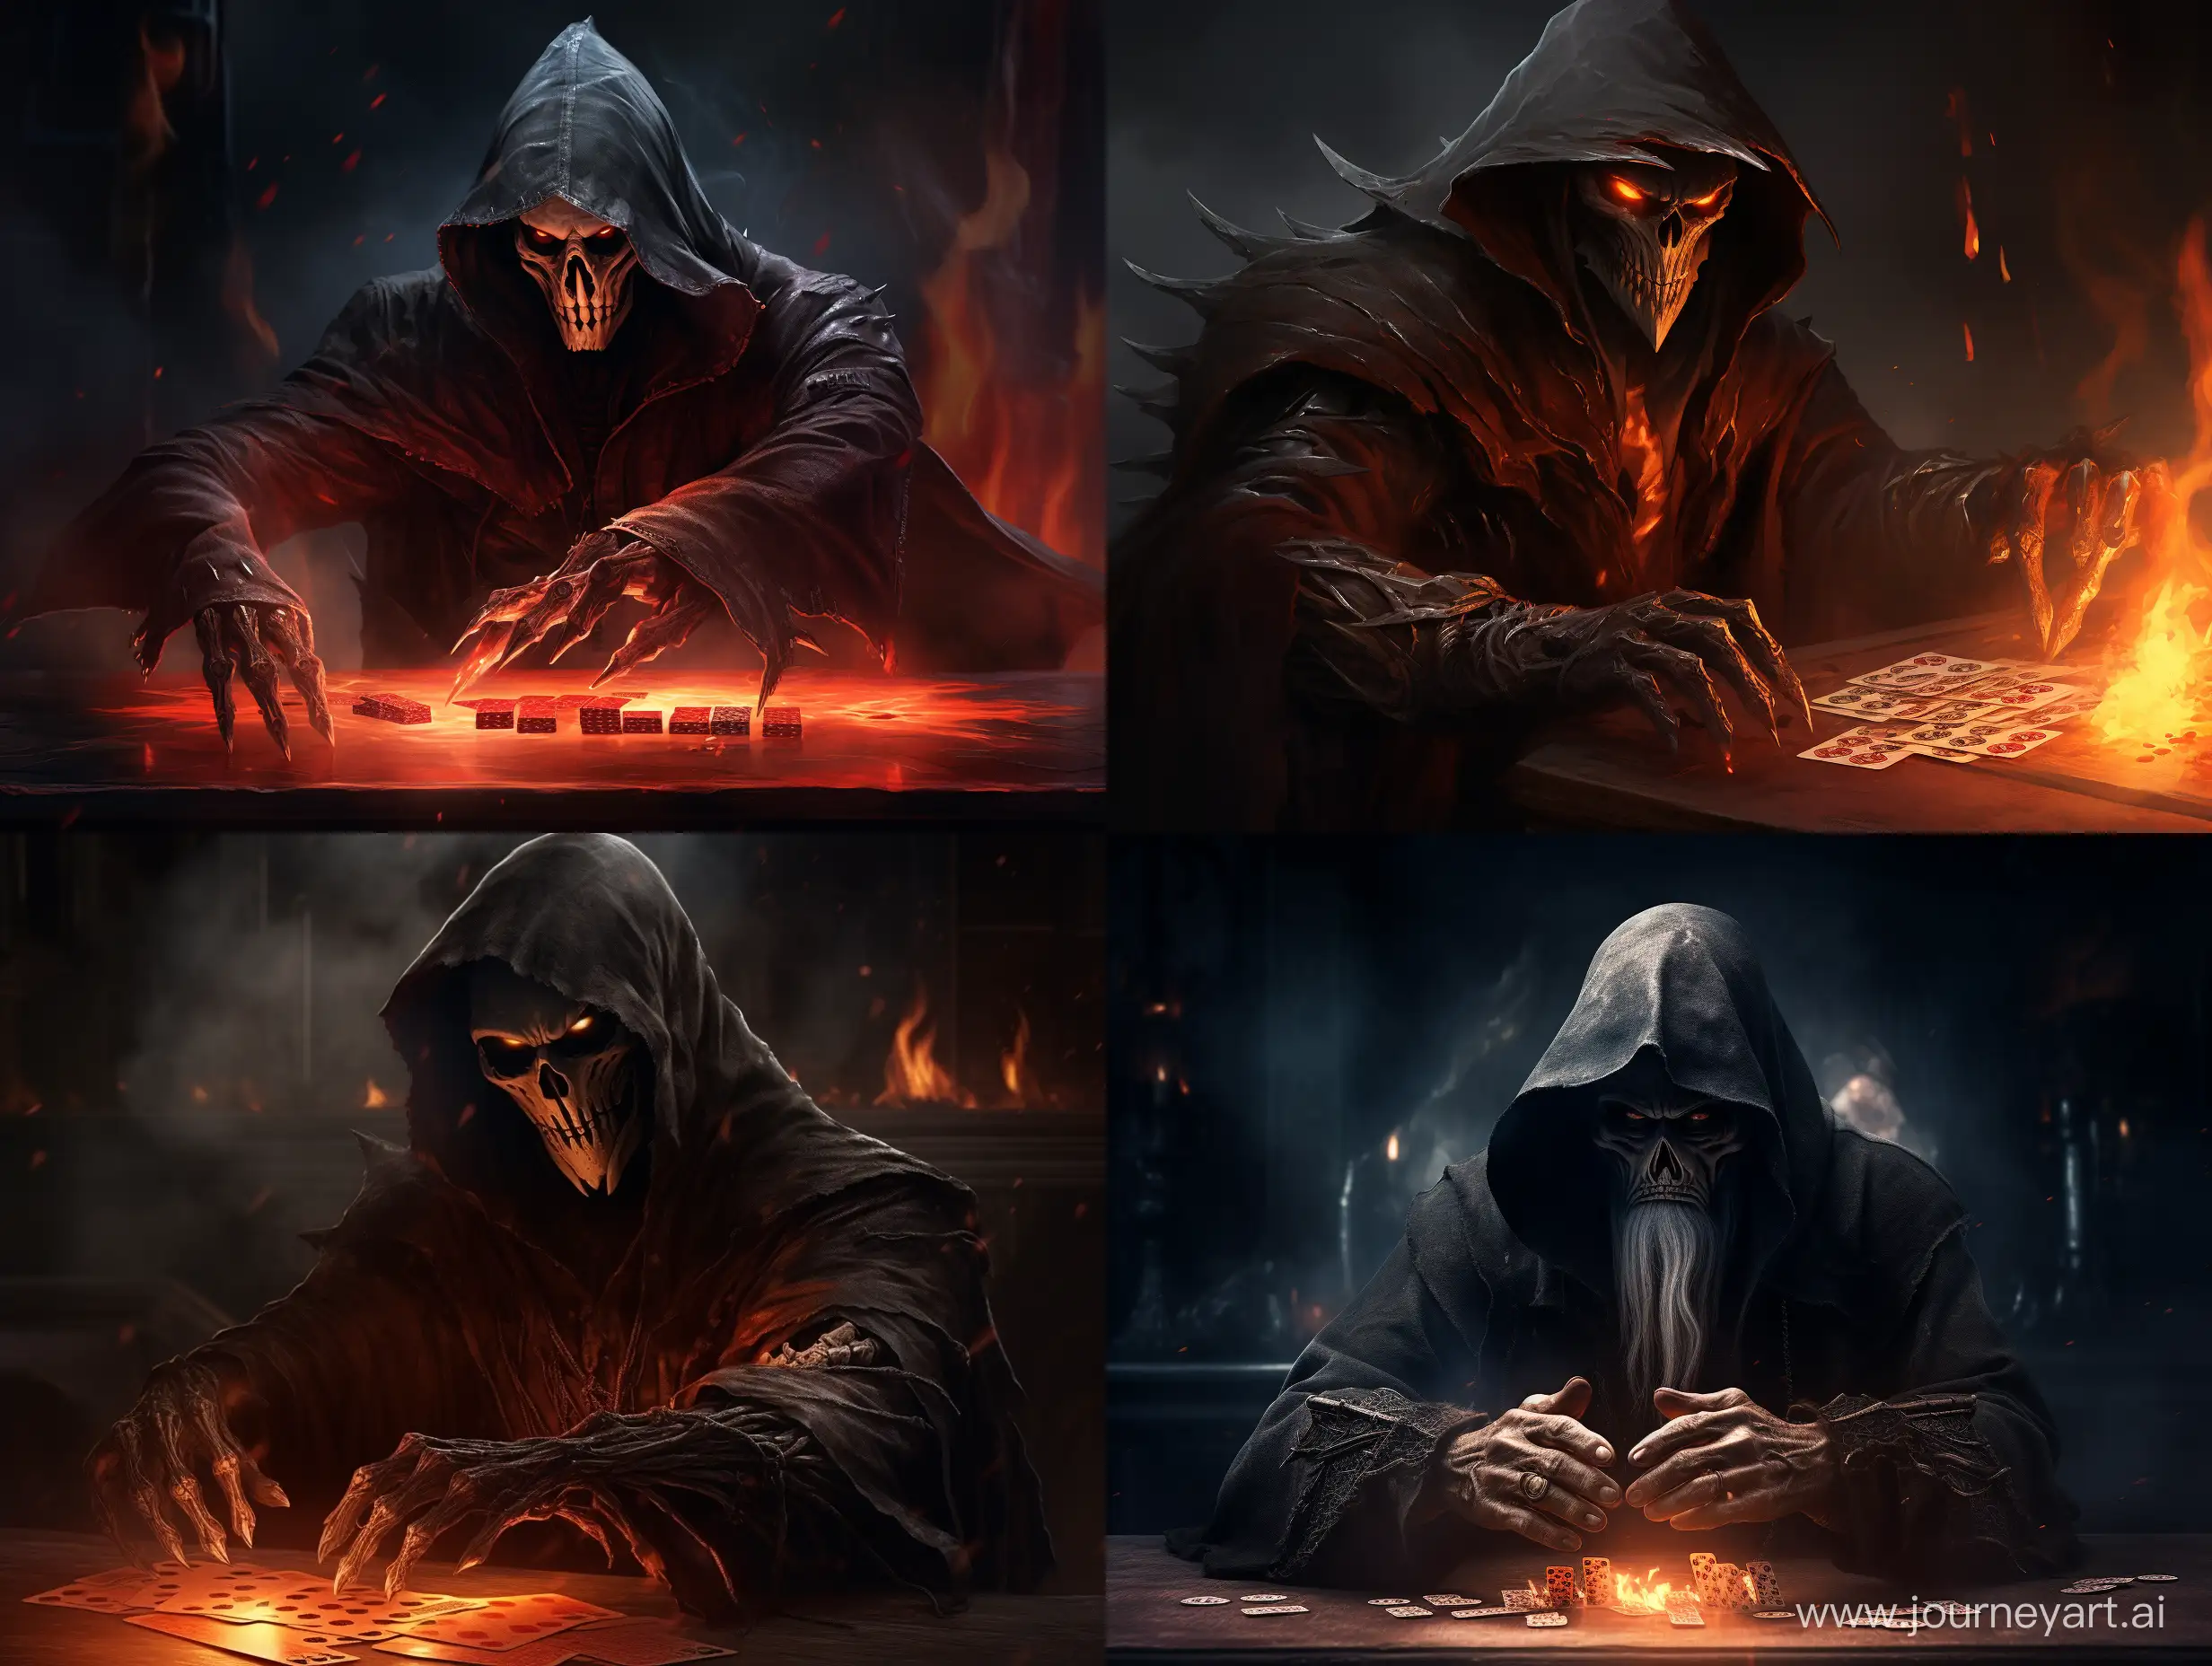 the reaper playing texas hold em poker with flaming aces in his hands